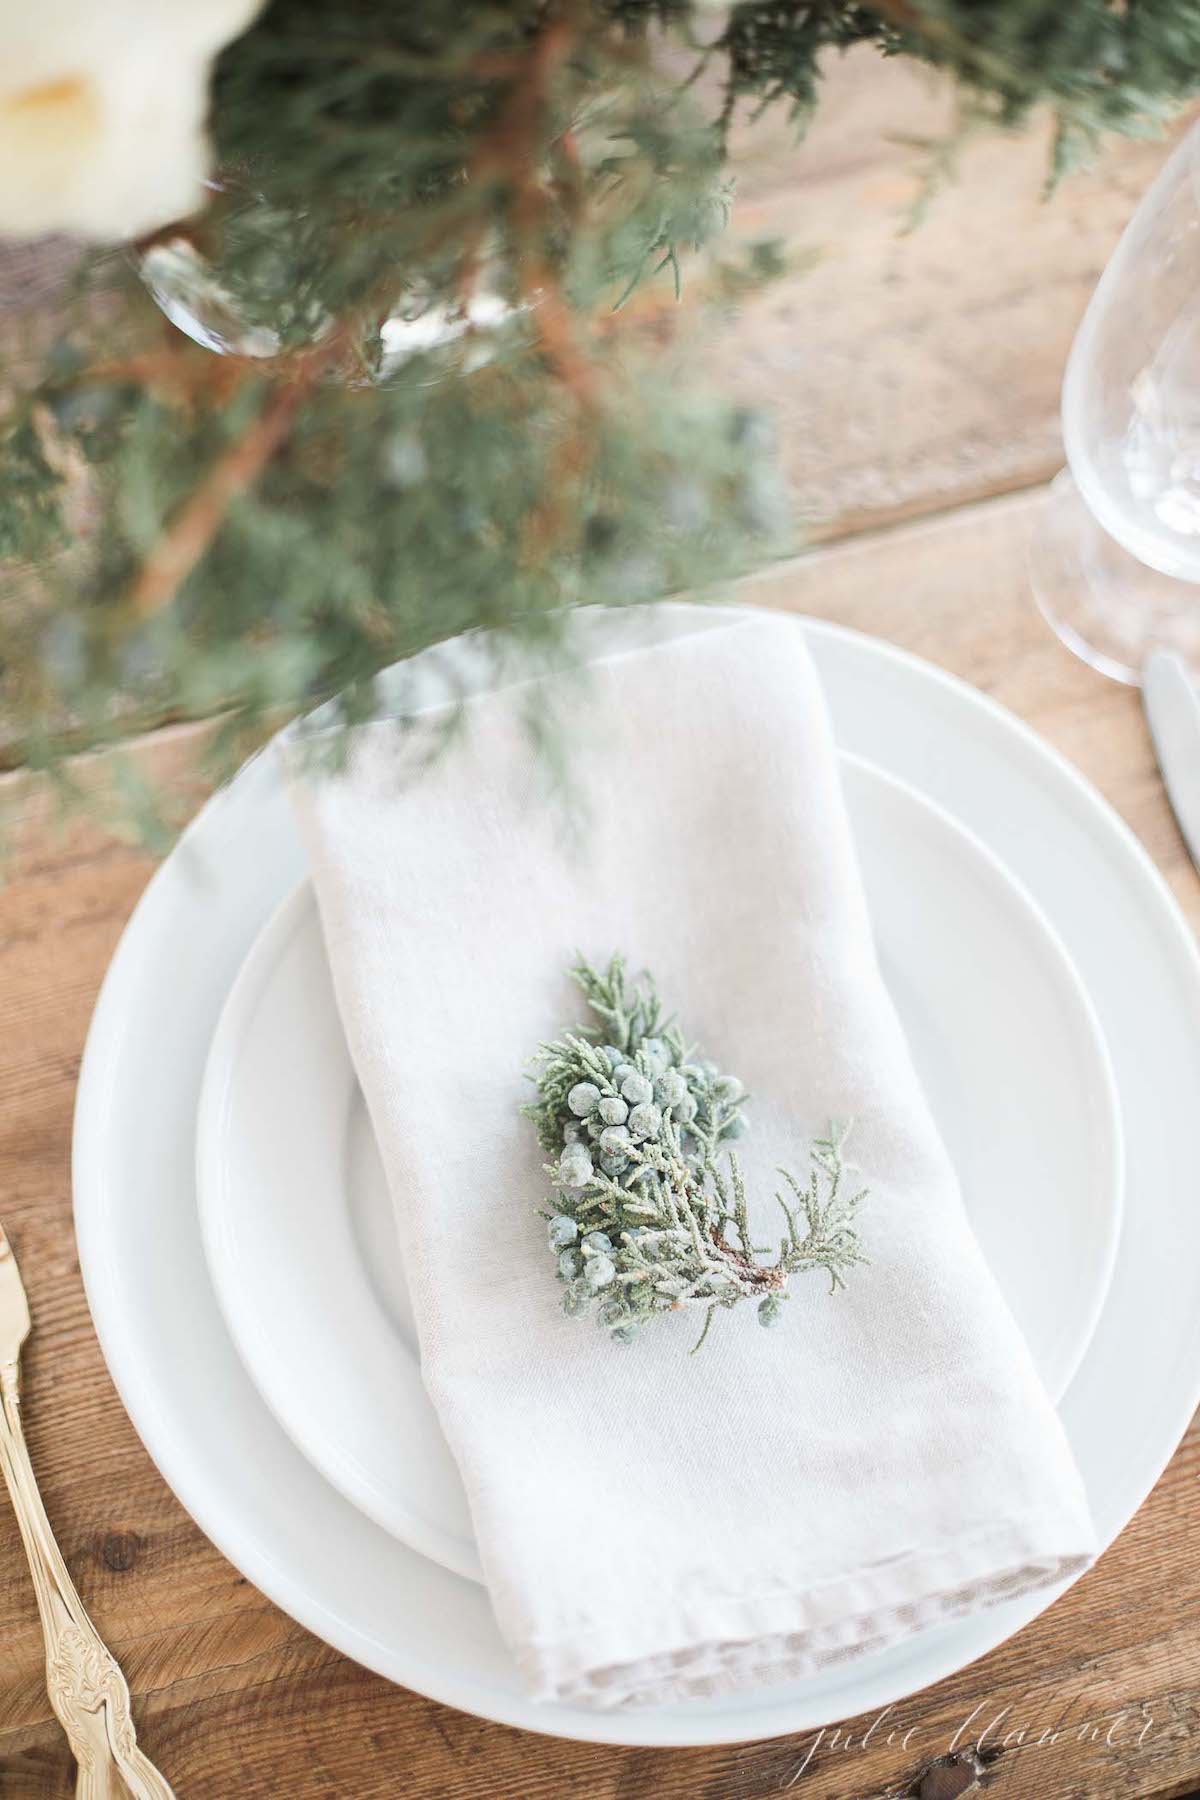 A table setting with a white napkin and greenery adorned with blue Christmas decorations.